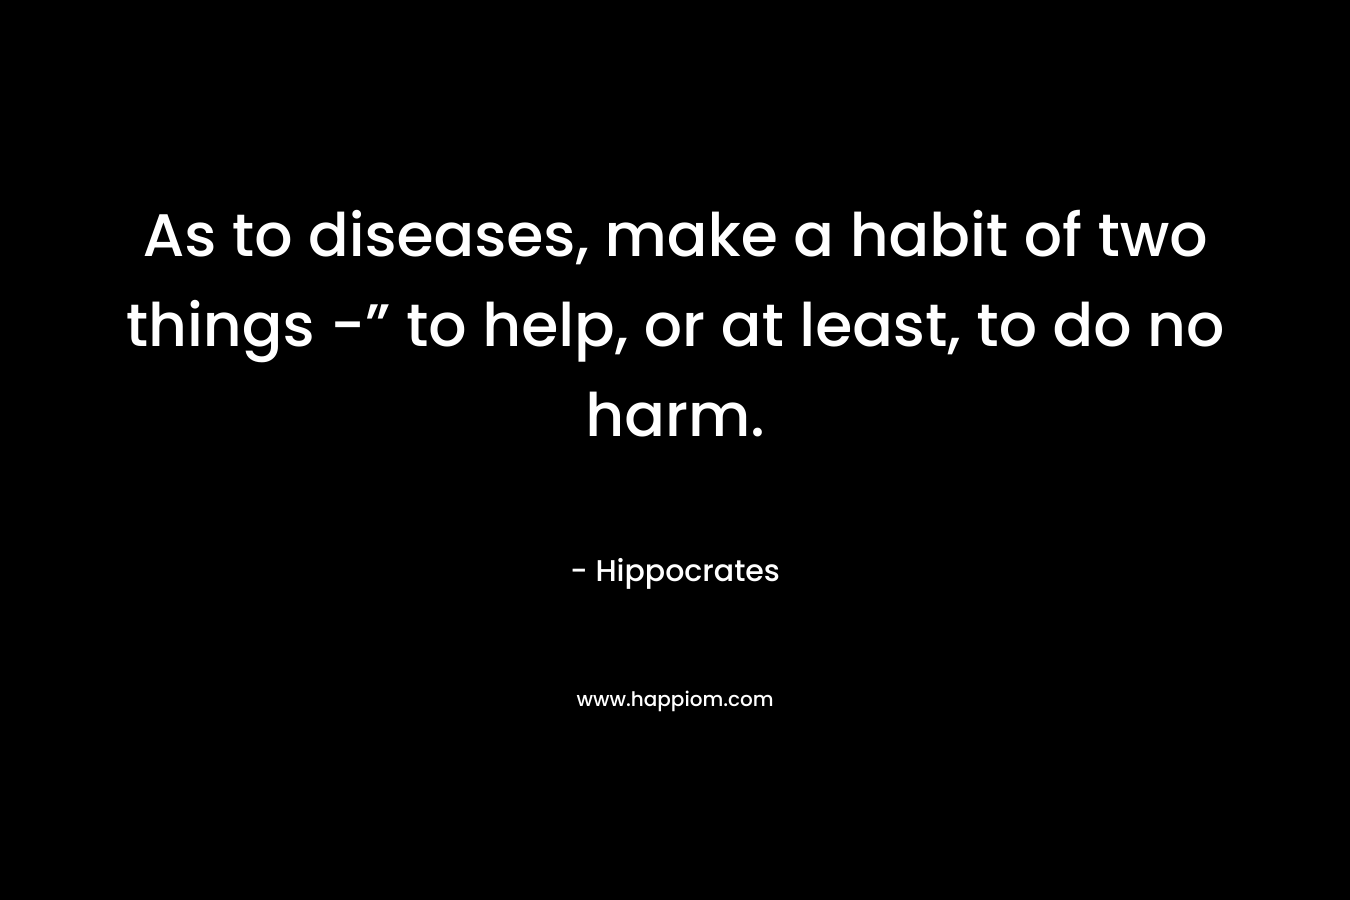 As to diseases, make a habit of two things -” to help, or at least, to do no harm.